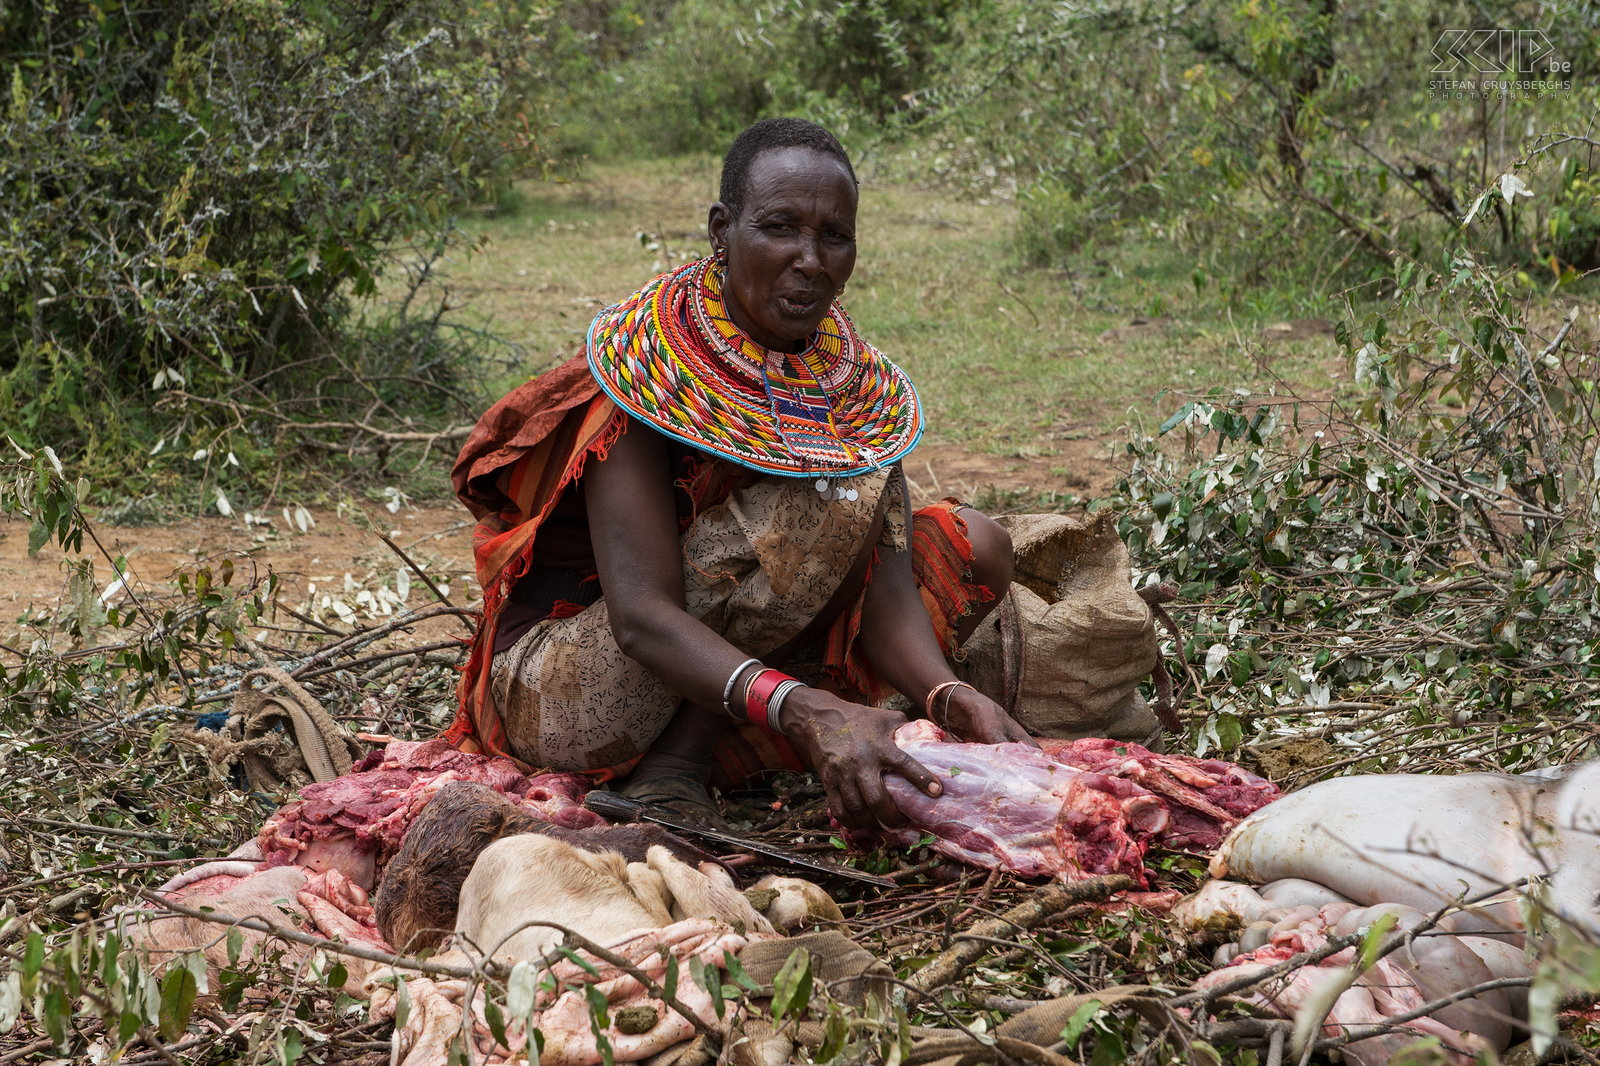 Kisima - Samburu lmuget - Woman In the afternoon the women started to cut the meat and clean and cook or roast the intestines of the slaughtered animals. Stefan Cruysberghs